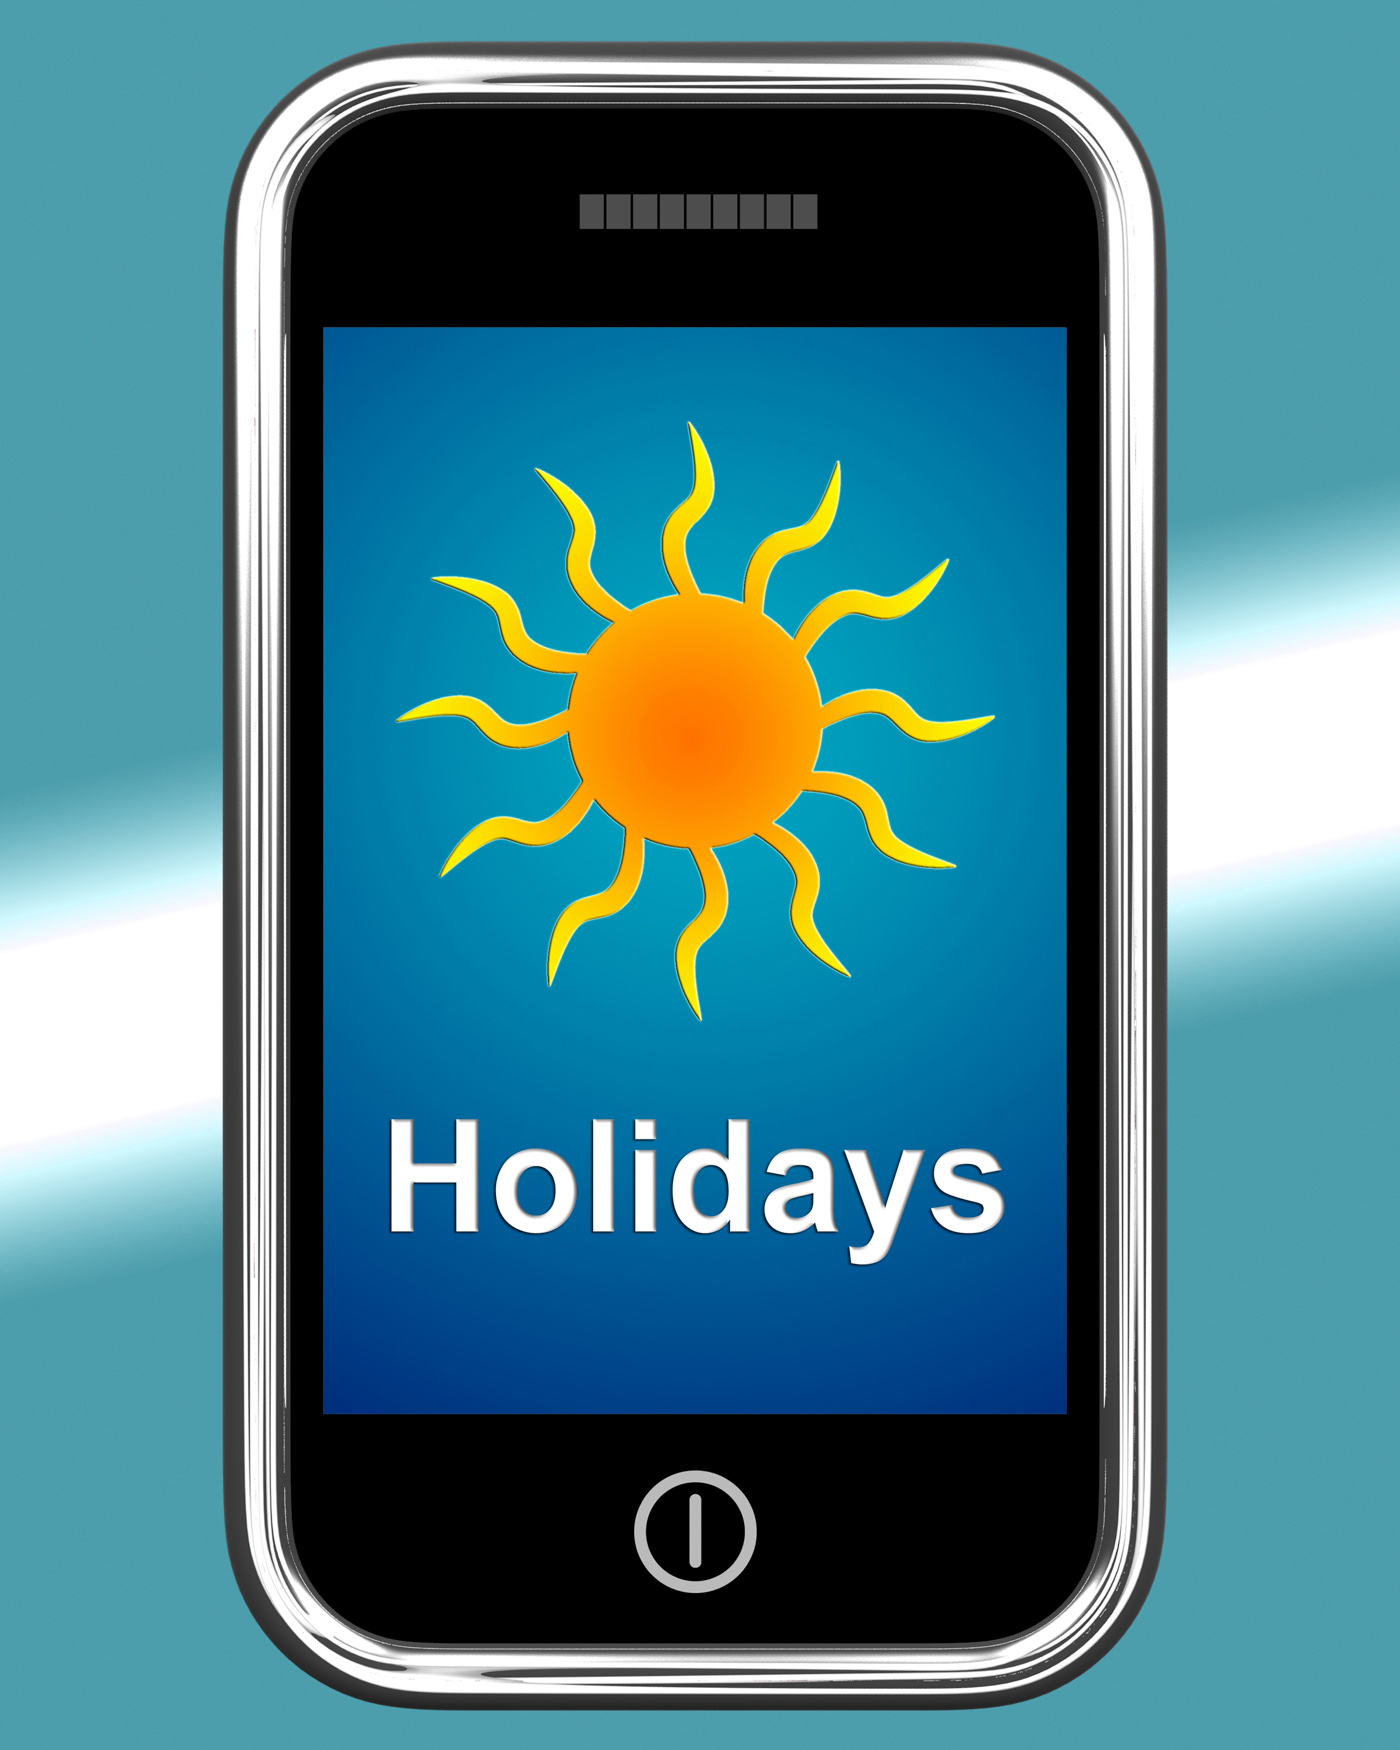 Holidays on phone means vacation leave or break photo